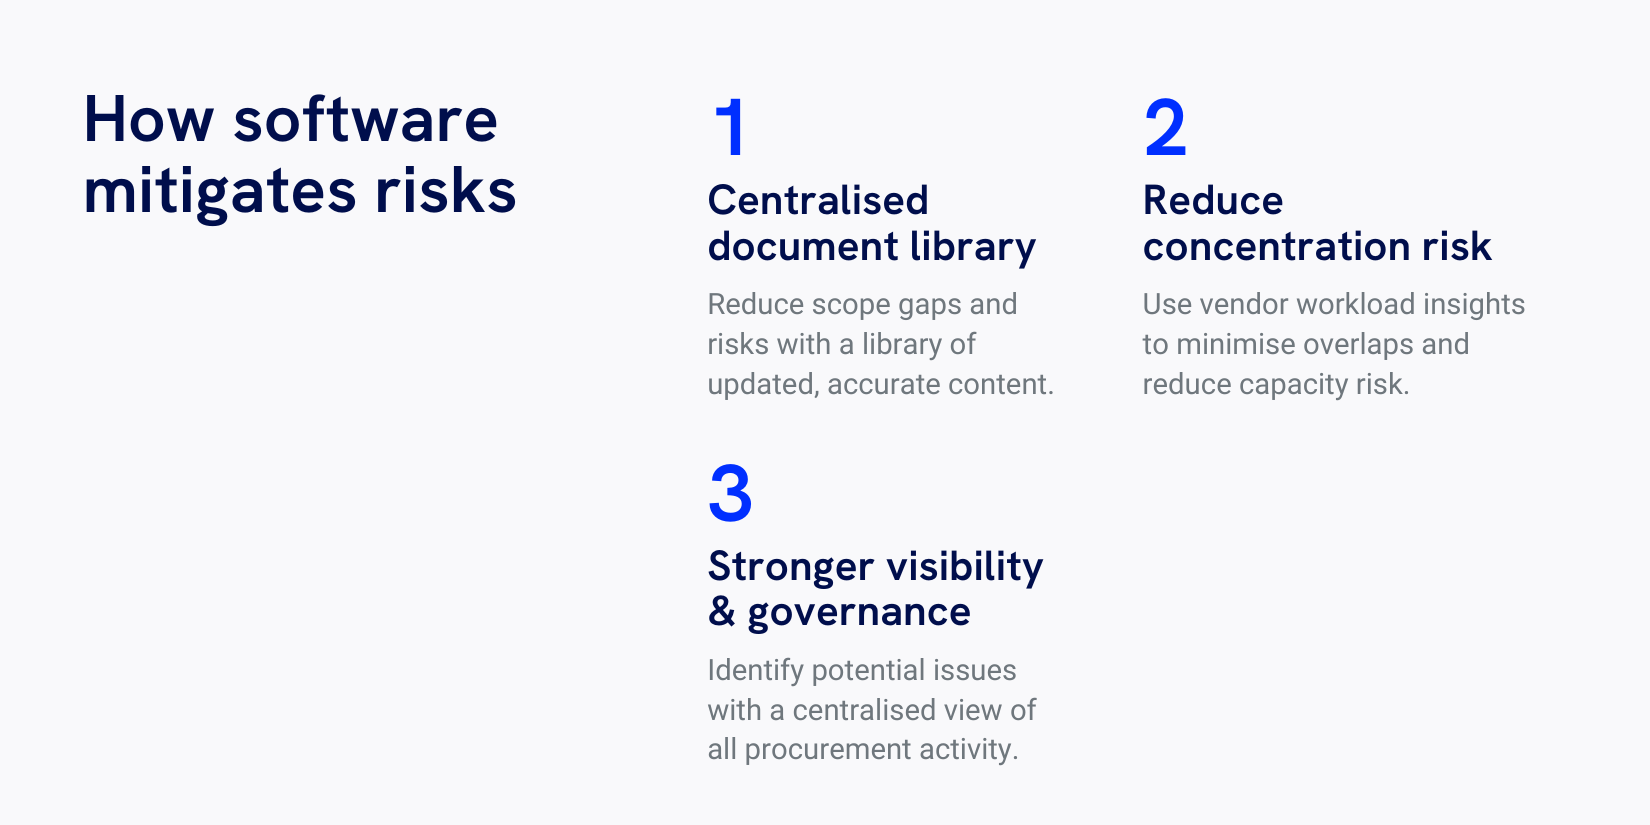 A graphic with a grey background, on the left the title 'How software mitigates risks' and on the right are three points, 1. Centralised document library, 2. Reduce concentration risk and 3. Stronger visibility and governance.